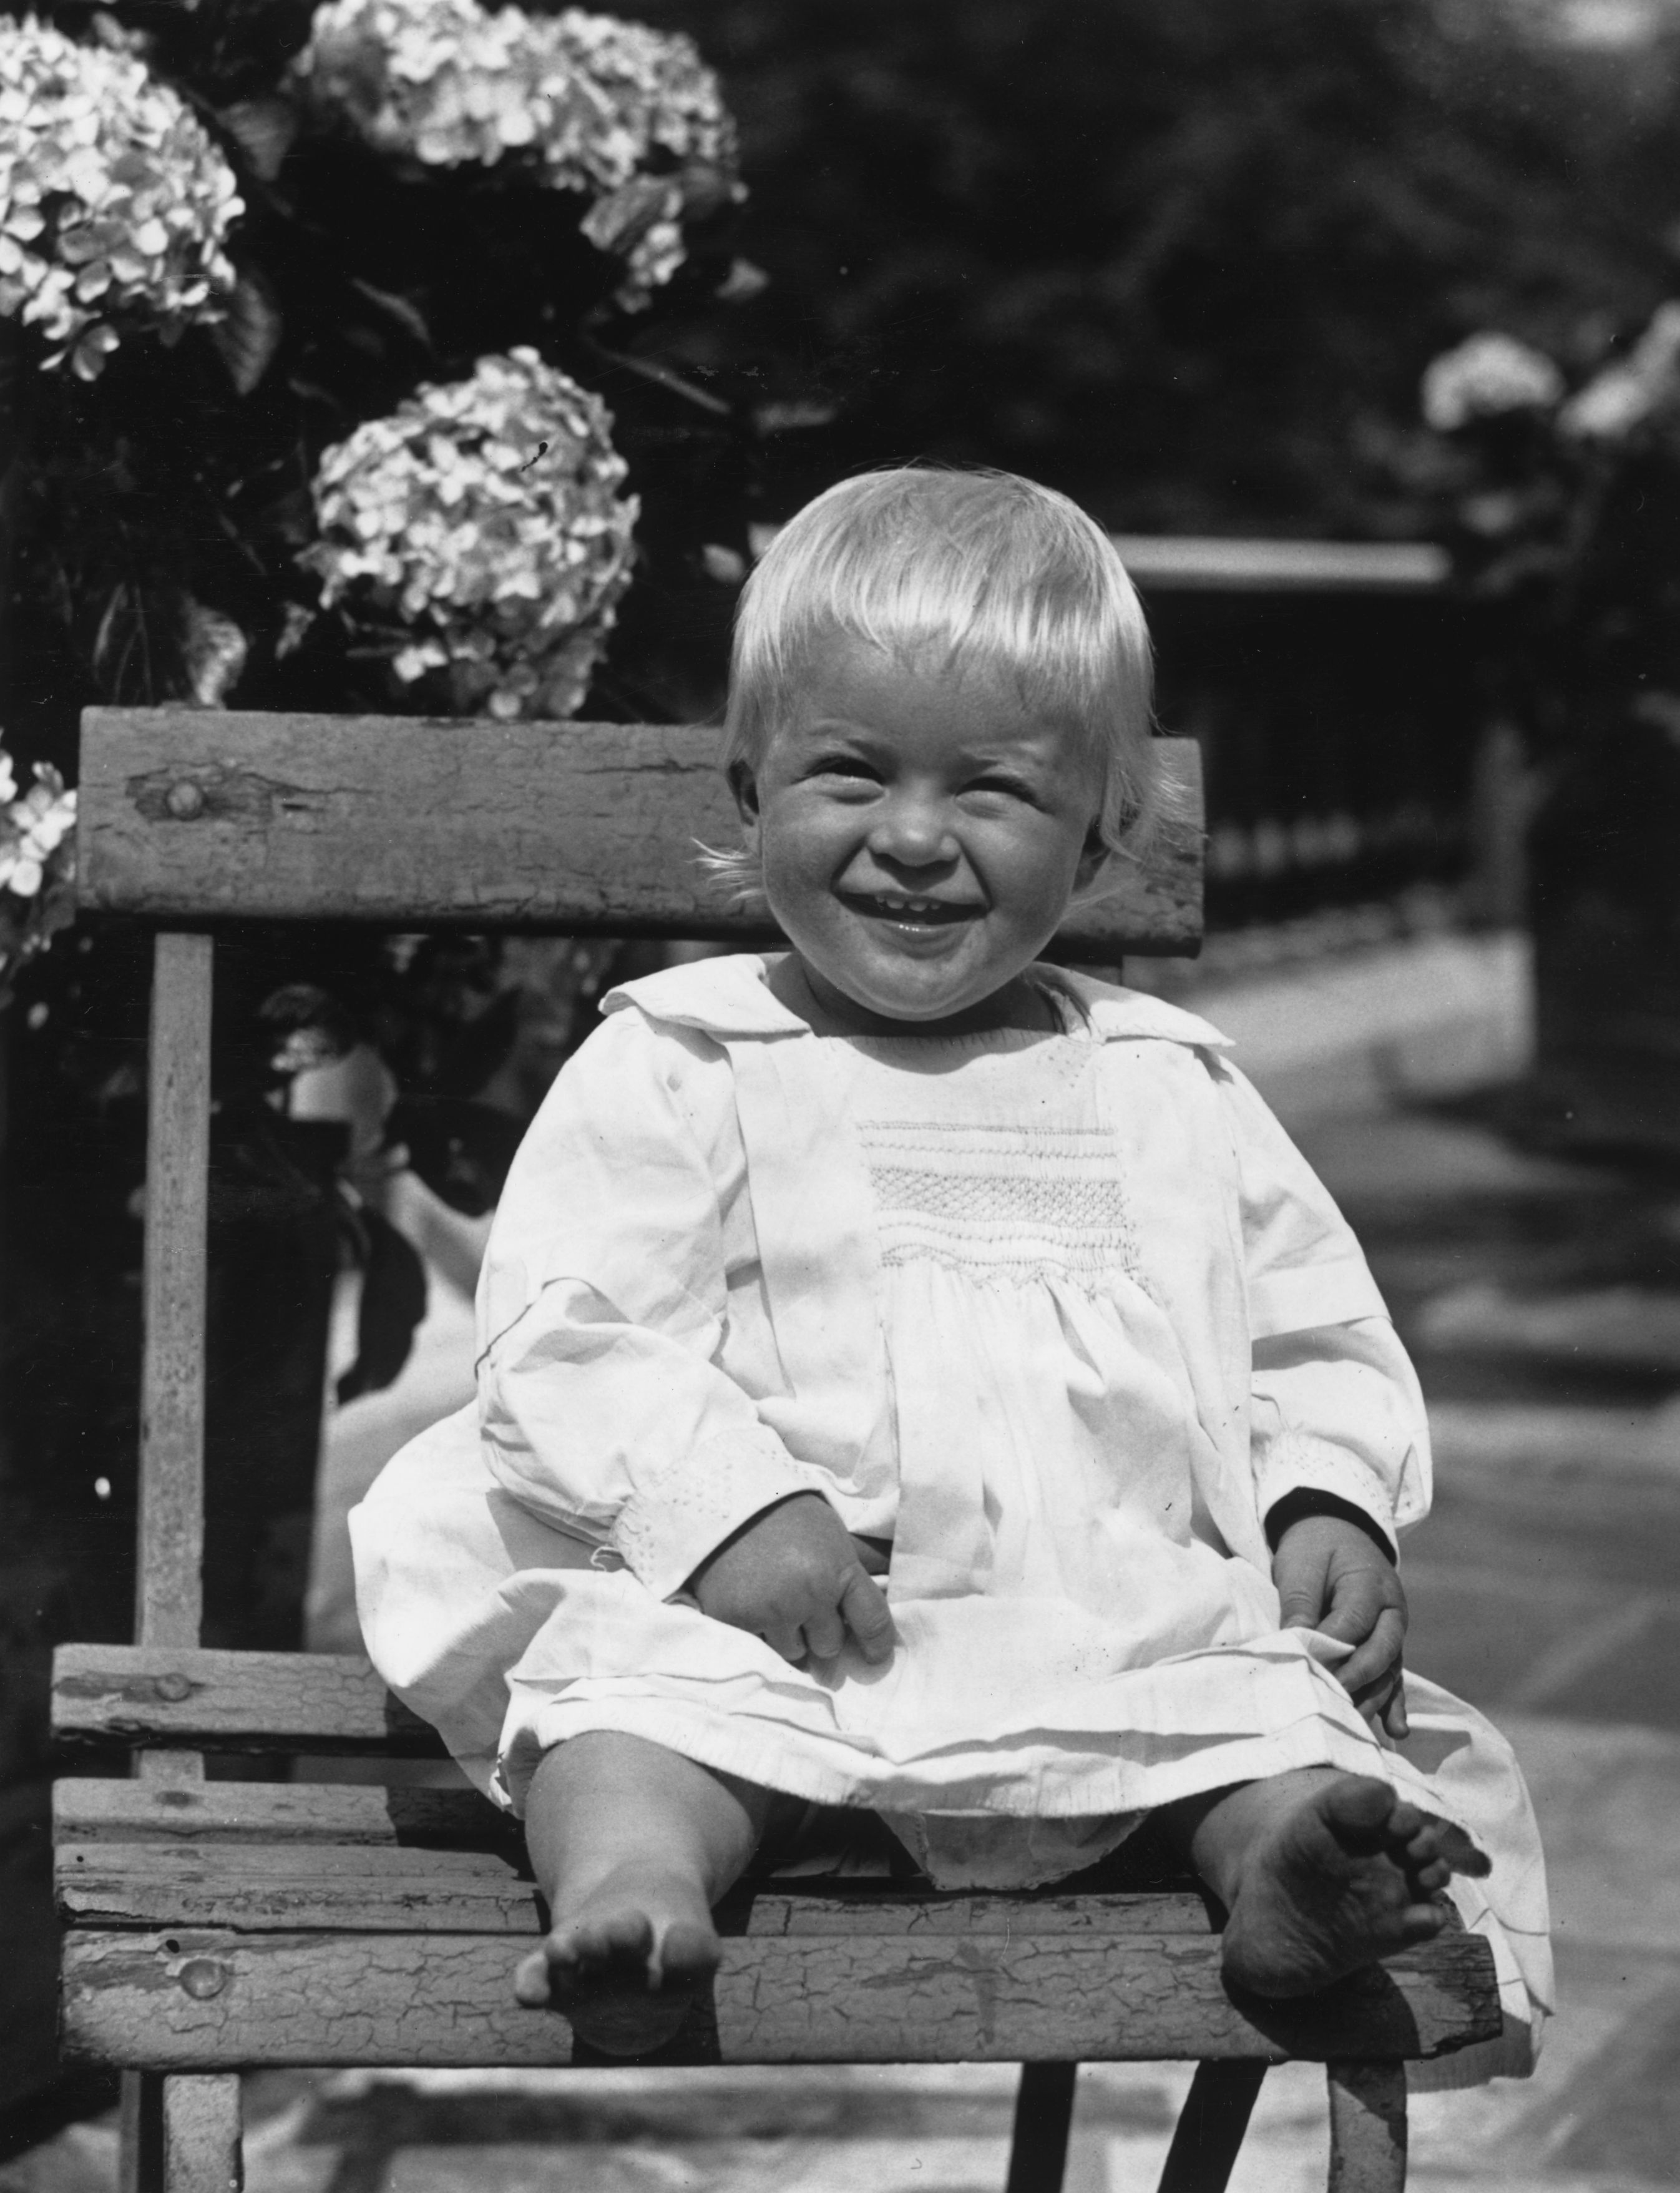 Prince Philip as a baby